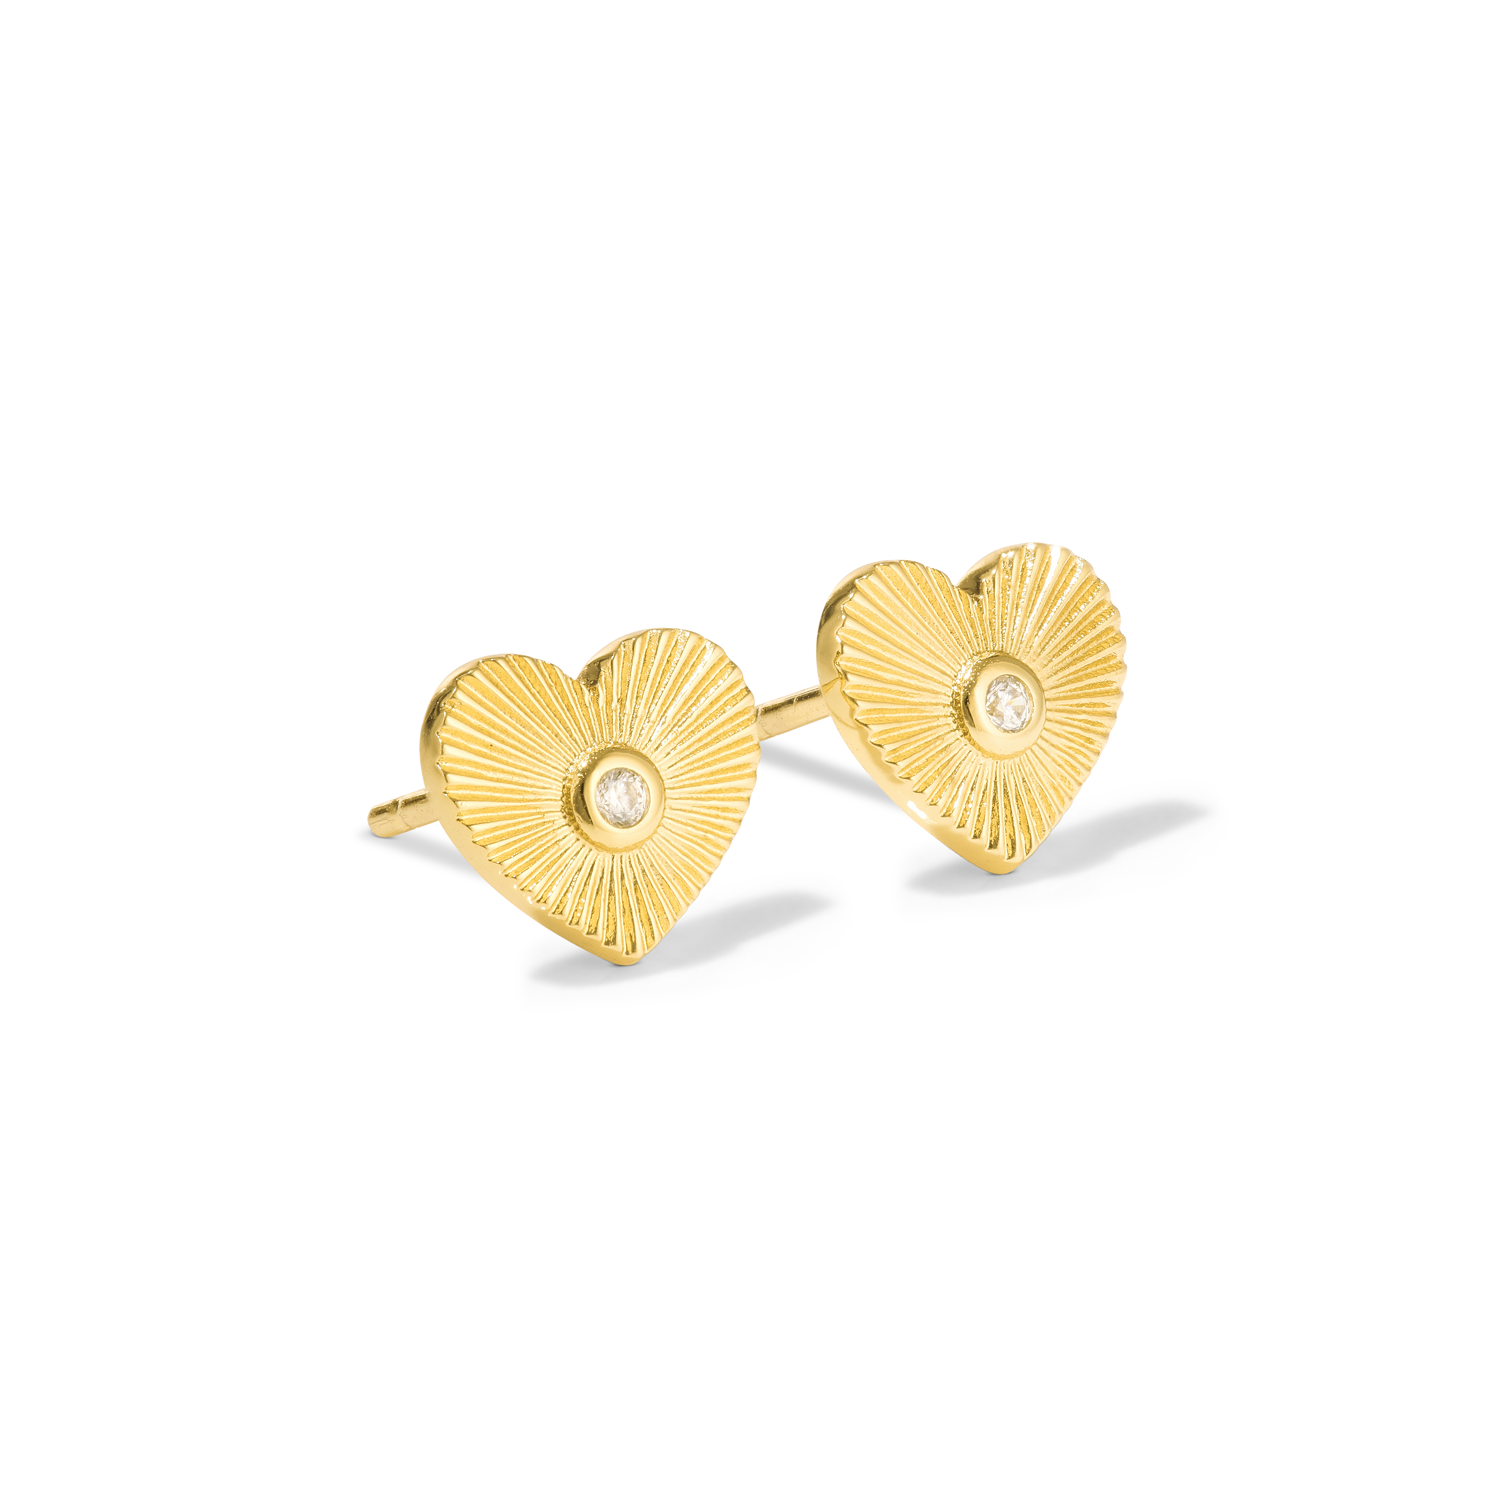 Charming and romantic heart shaped earrings in gold with cubic zirconia